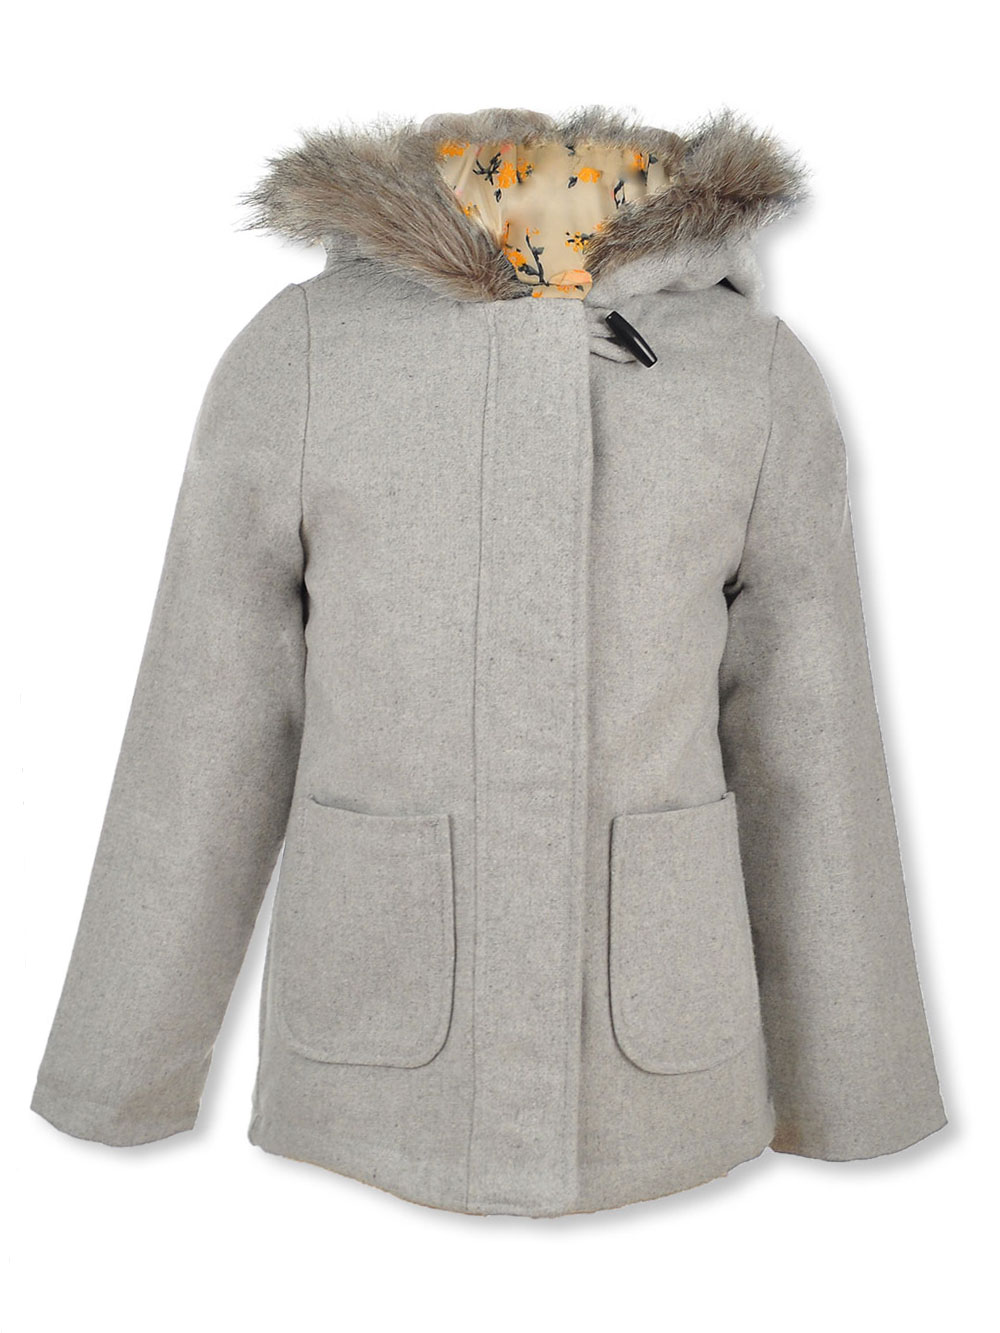 Jessica Simpson Big Girls Single Breasted Hooded Faux Wool Coat